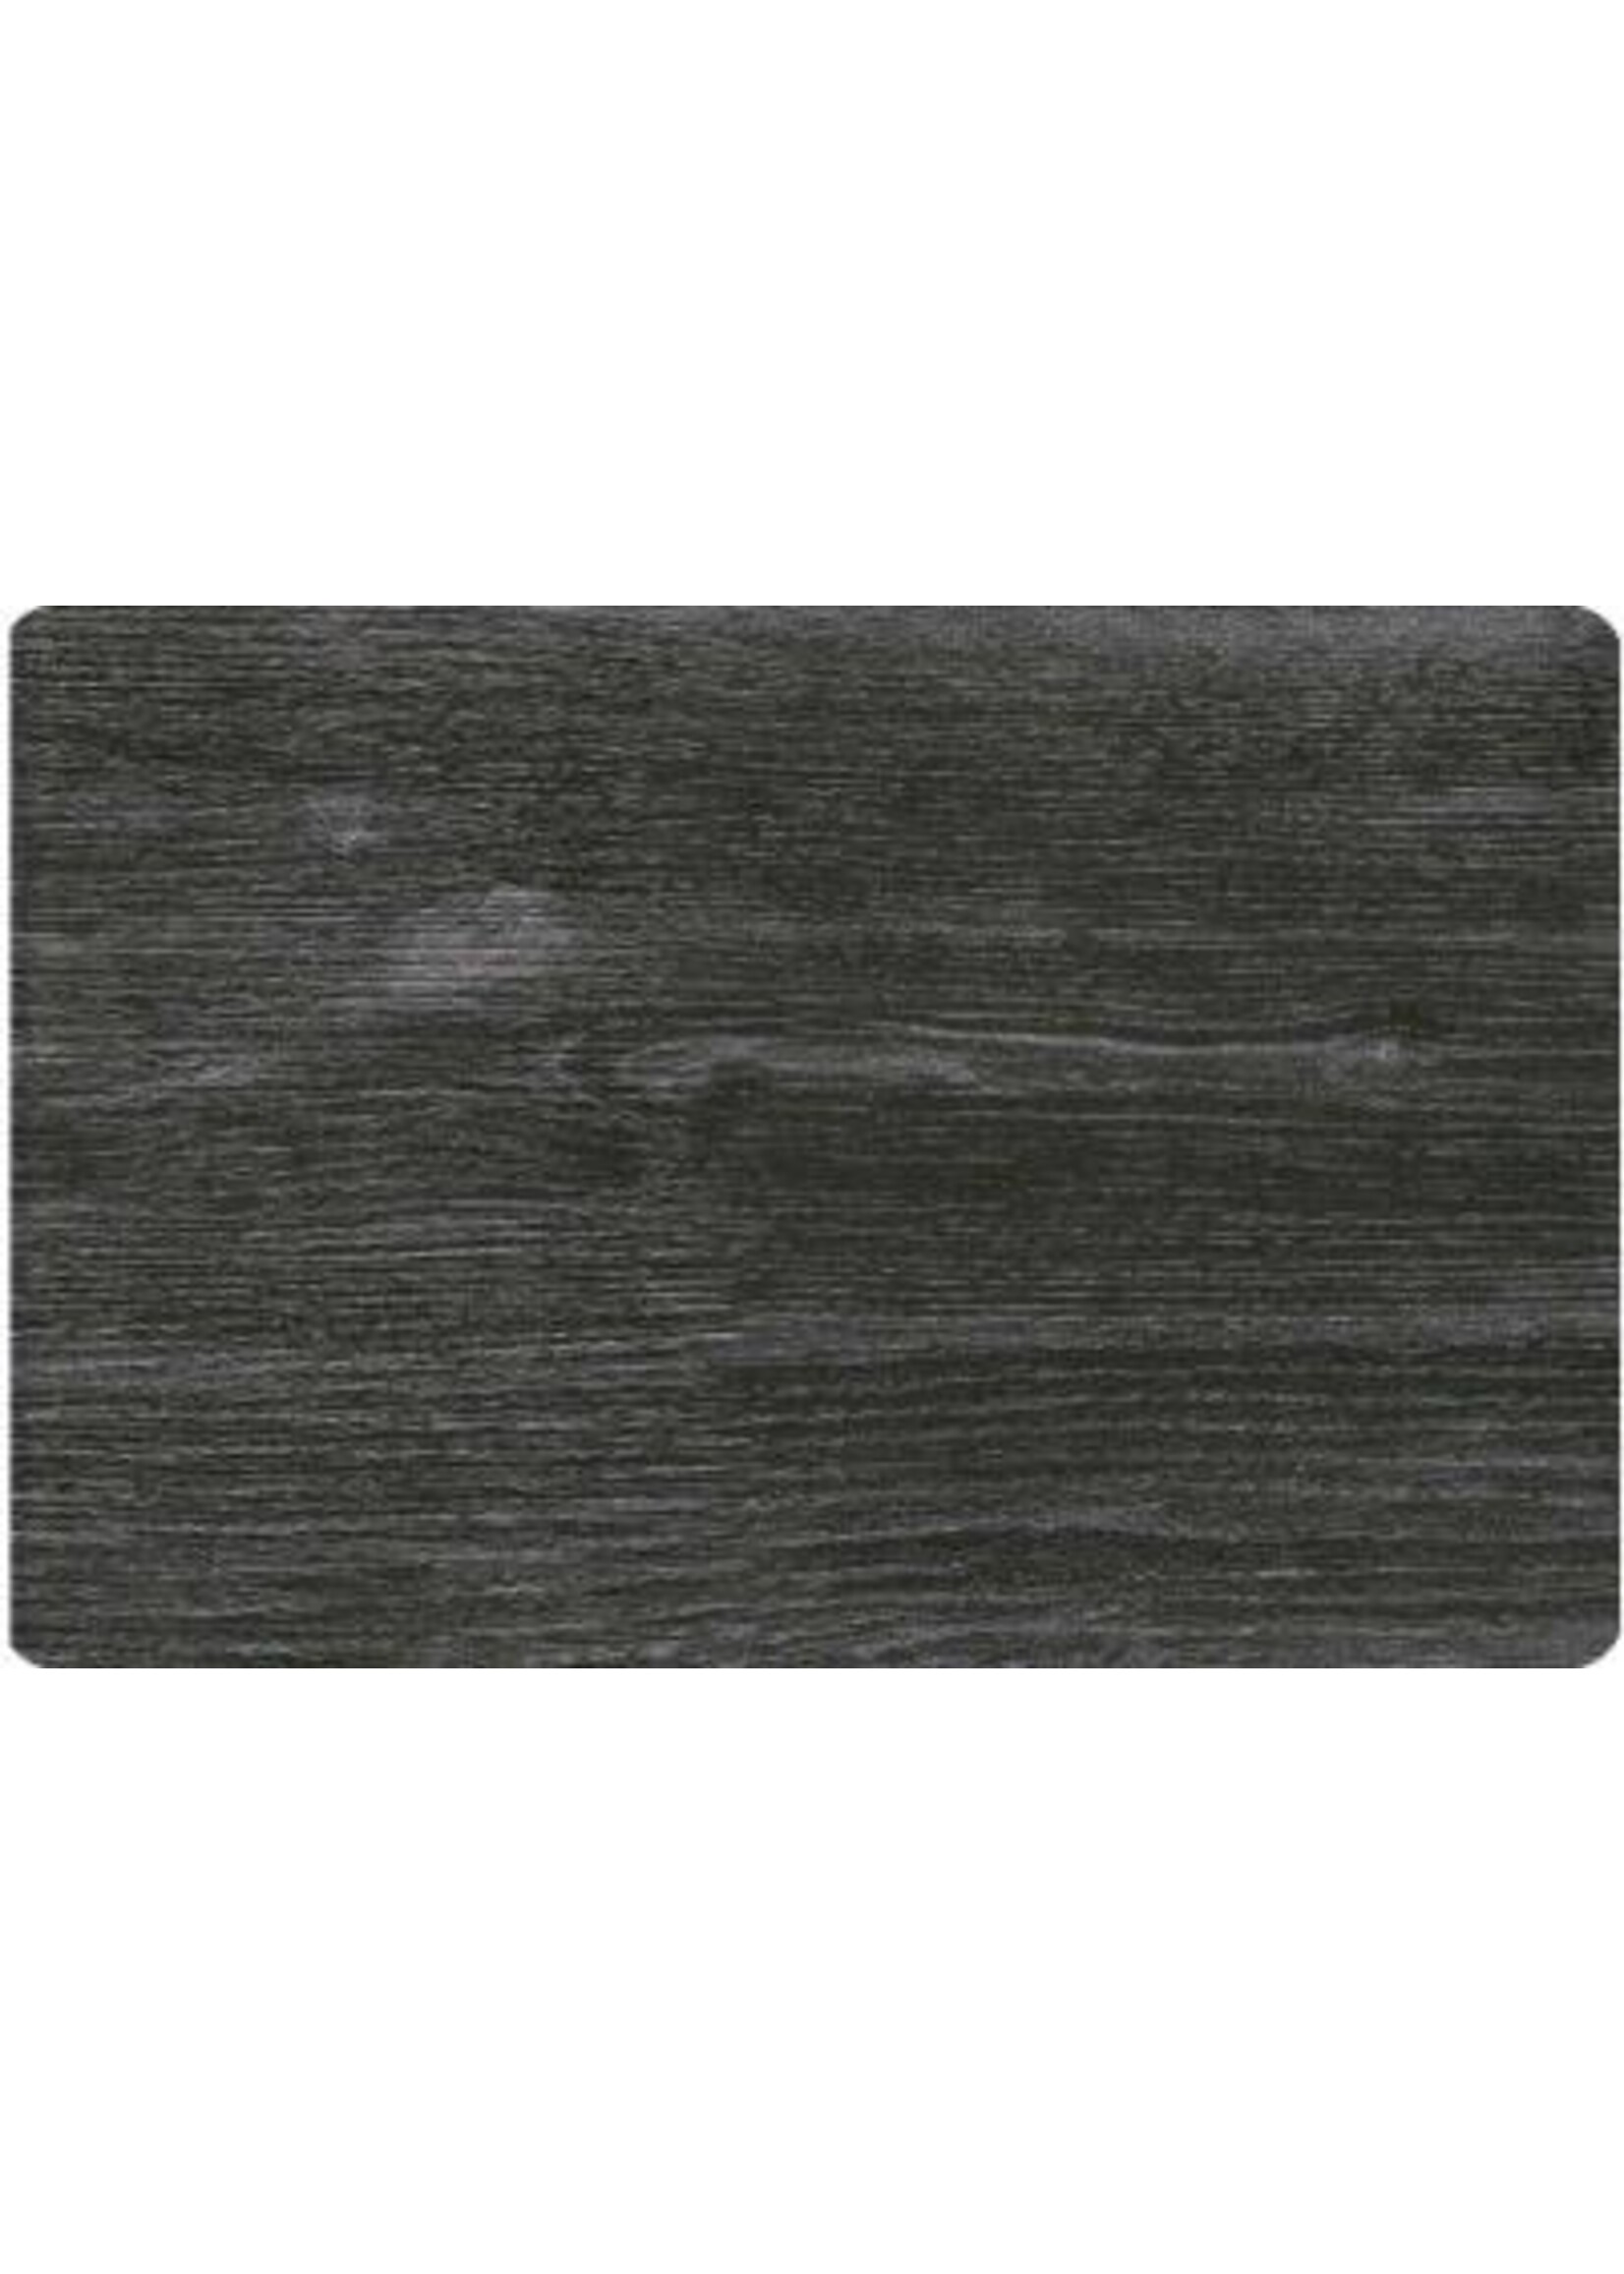 ITY INTERNATIONAL FAUX WOOD GRAIN PLACEMATS